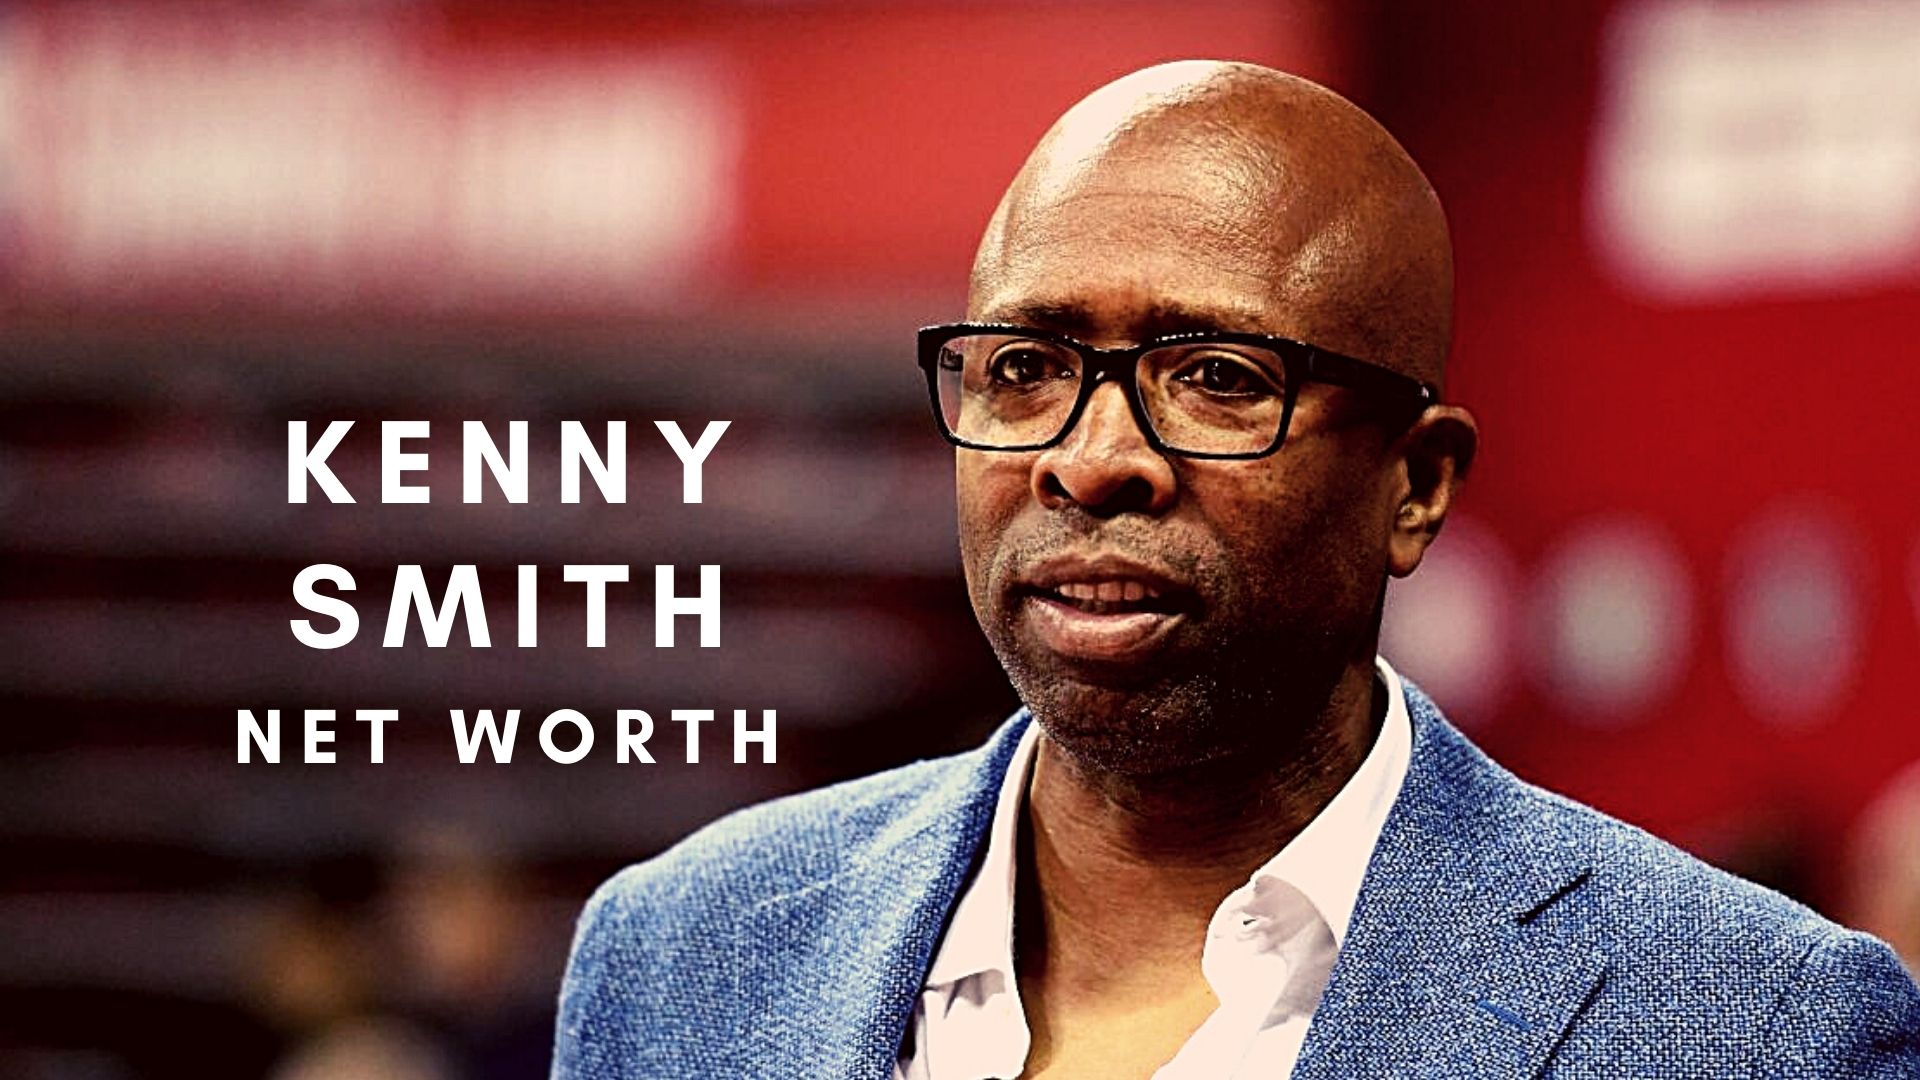 Kenny Smith 2021 Net Worth, Salary, Records, and Endorsements